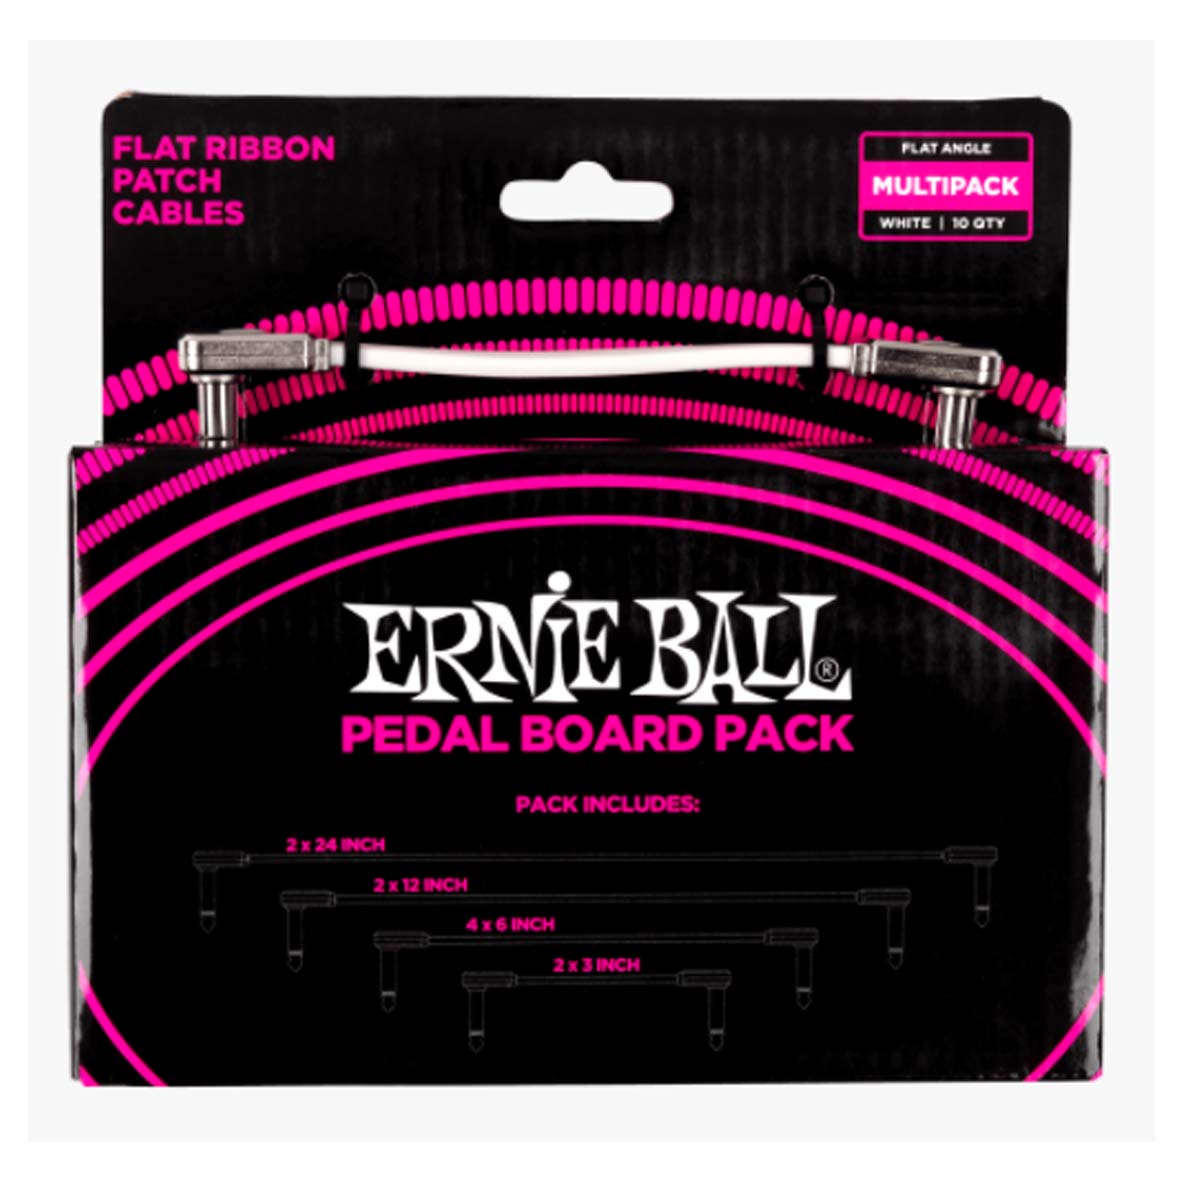 Ernie Ball 6387 Multi-Pack Flat Ribbon Patch Cables Pedalboard - White